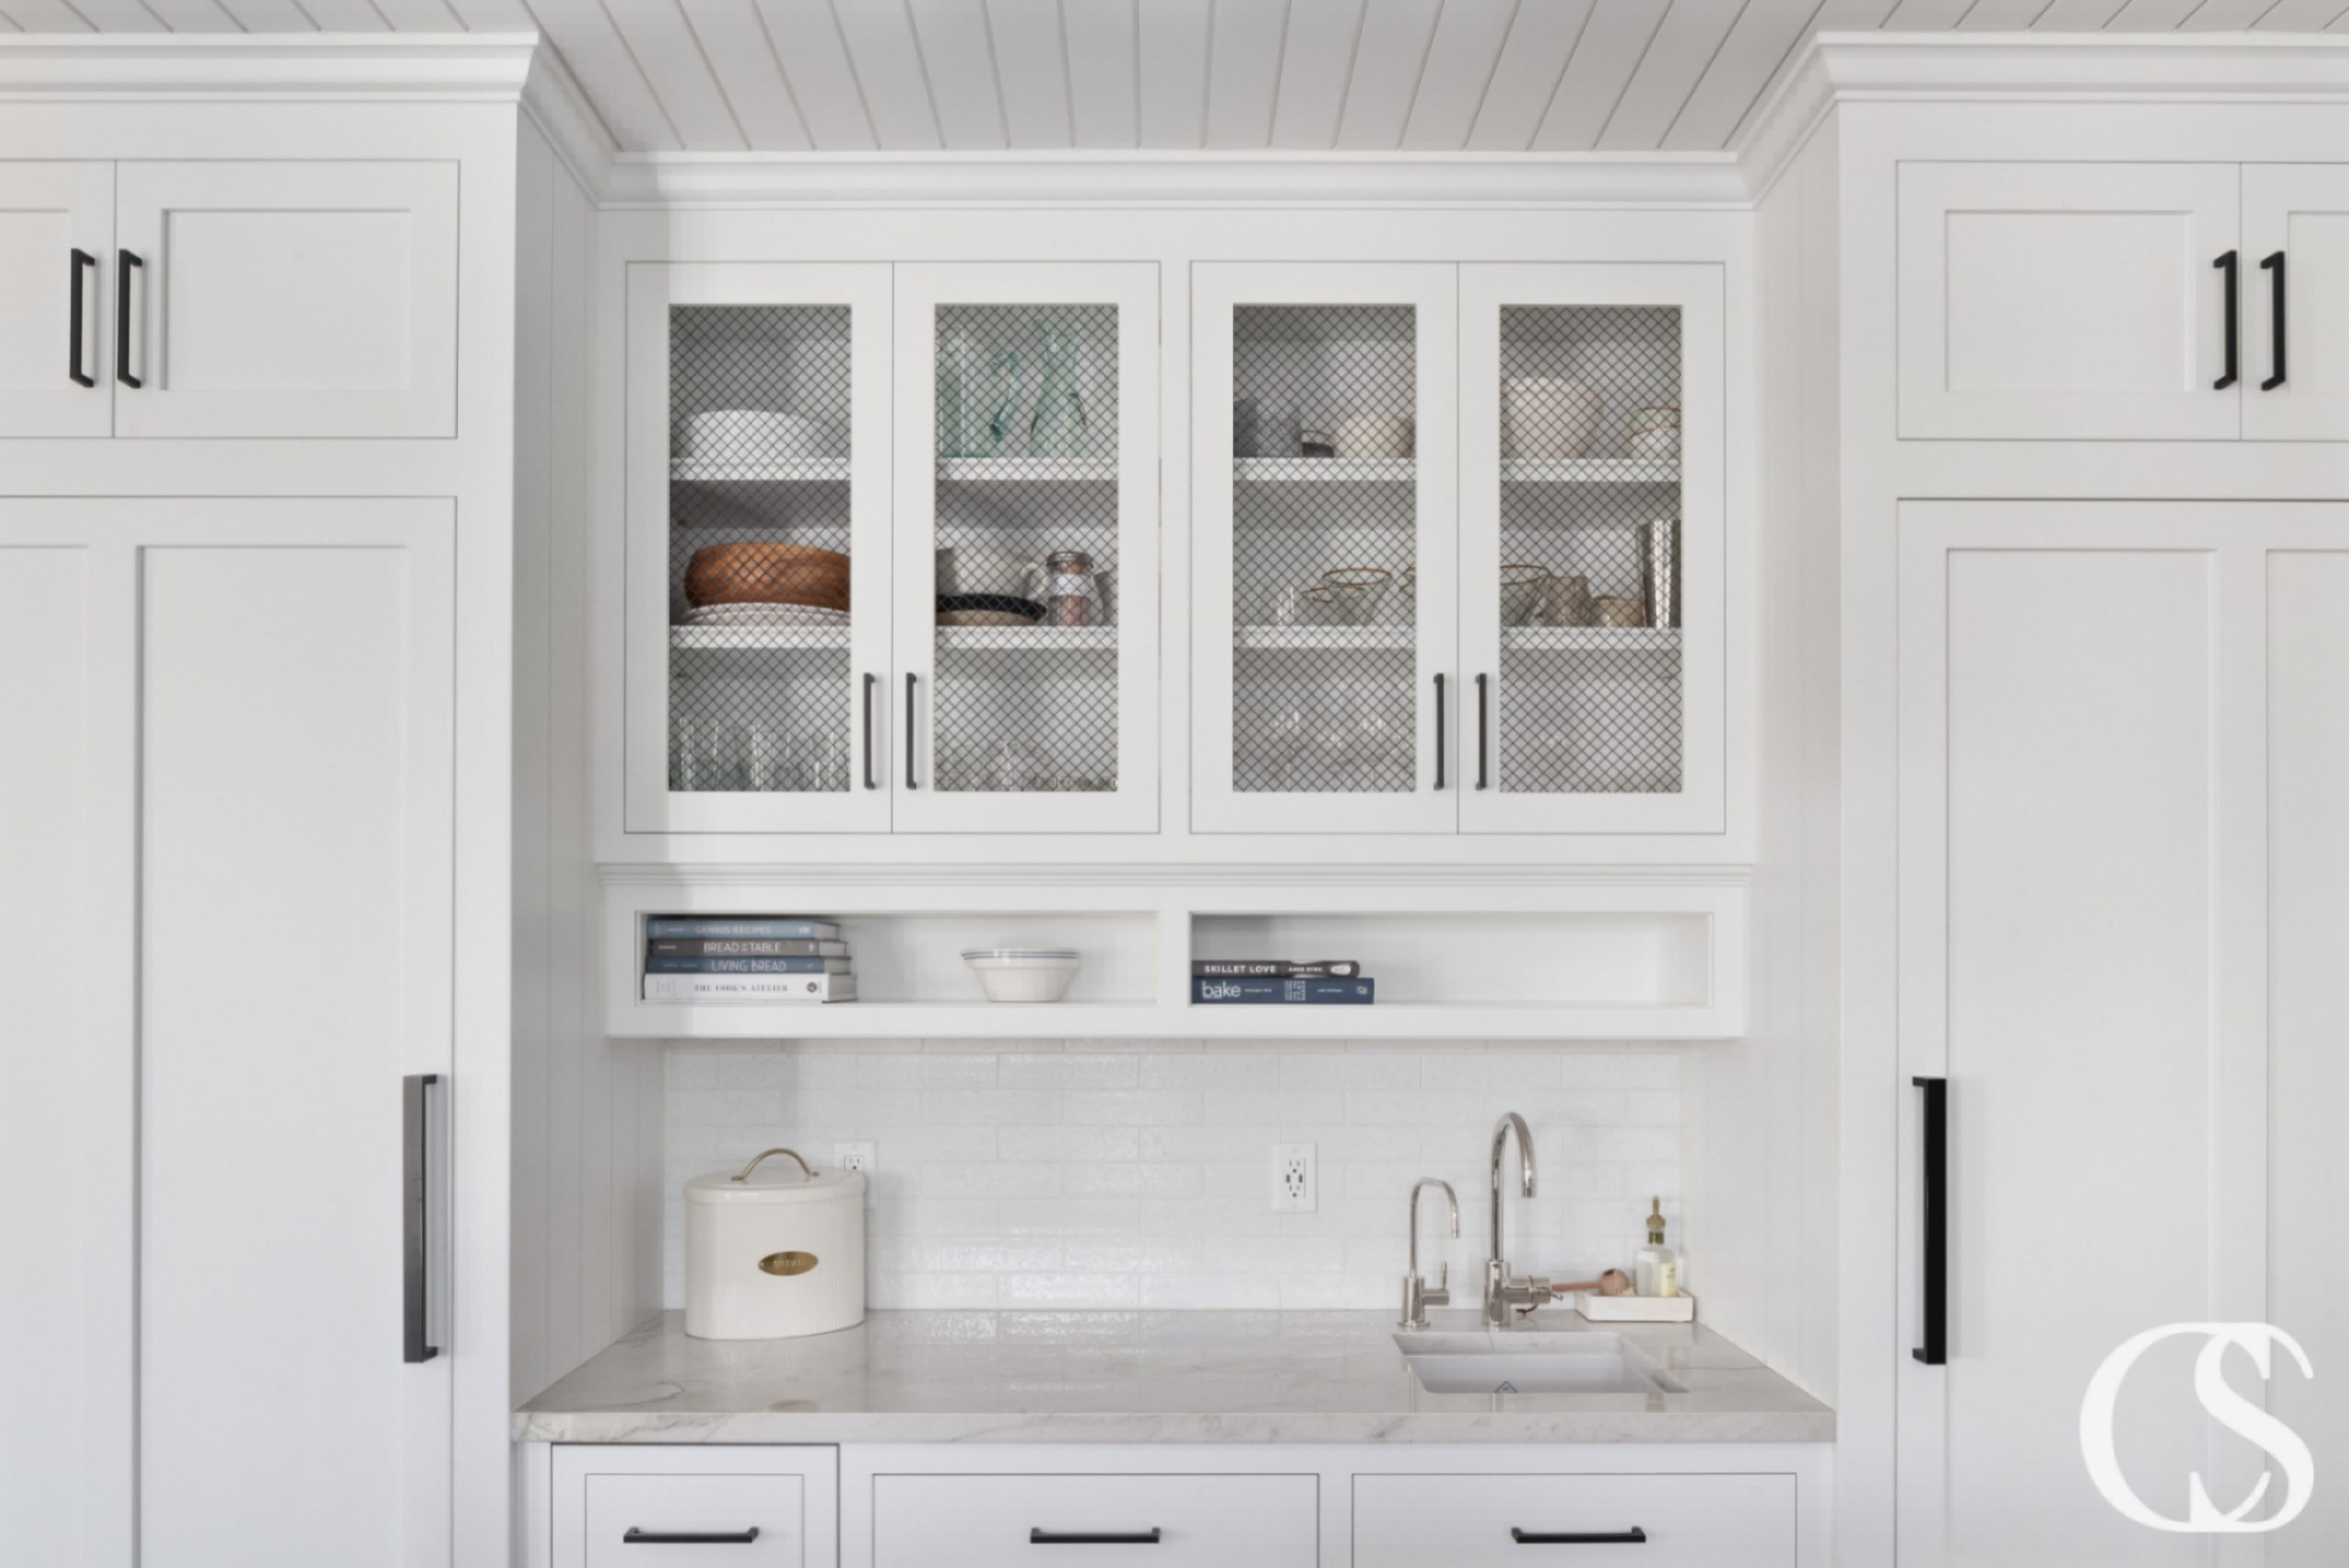 Custom white kitchen cabinets designed to fit seamlessly into any kitchen design, featuring premium materials and ample storage space for a functional and stylish look.